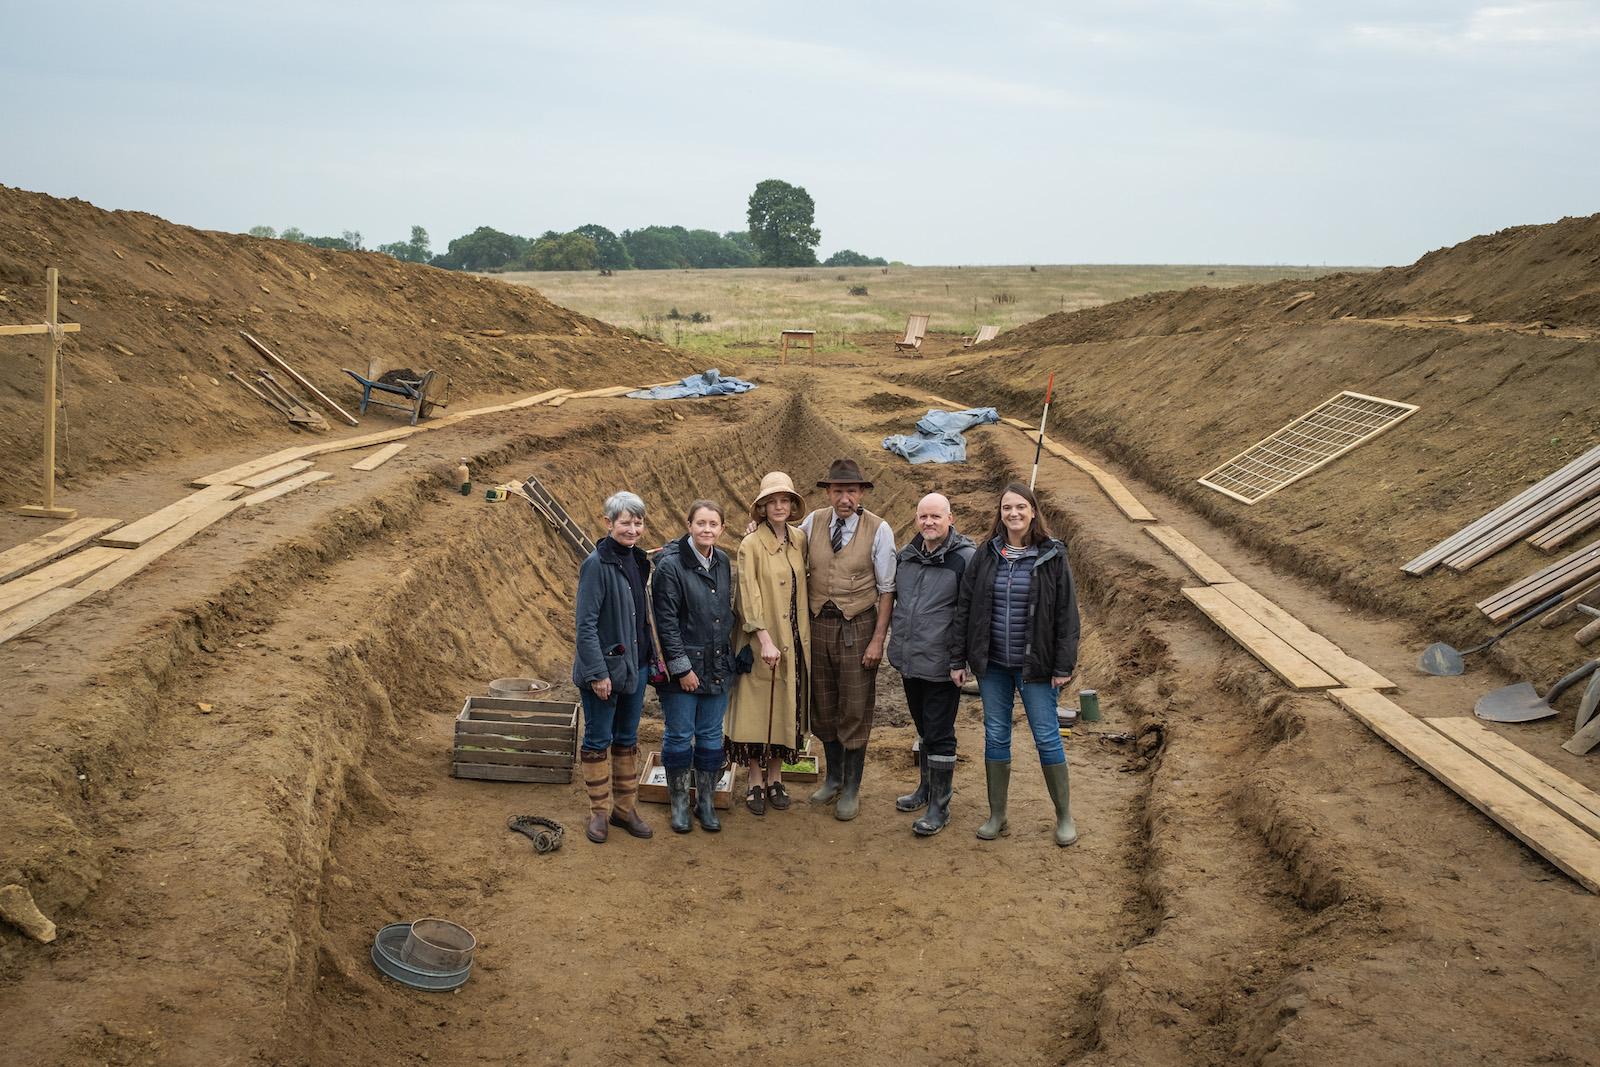 THE DIG (L-R)- CAREY MULLIGAN as EDITH PRETTY, RALPH FIENNES as BASIL BROWN. cast and crew are pictured standing in their excavation pit